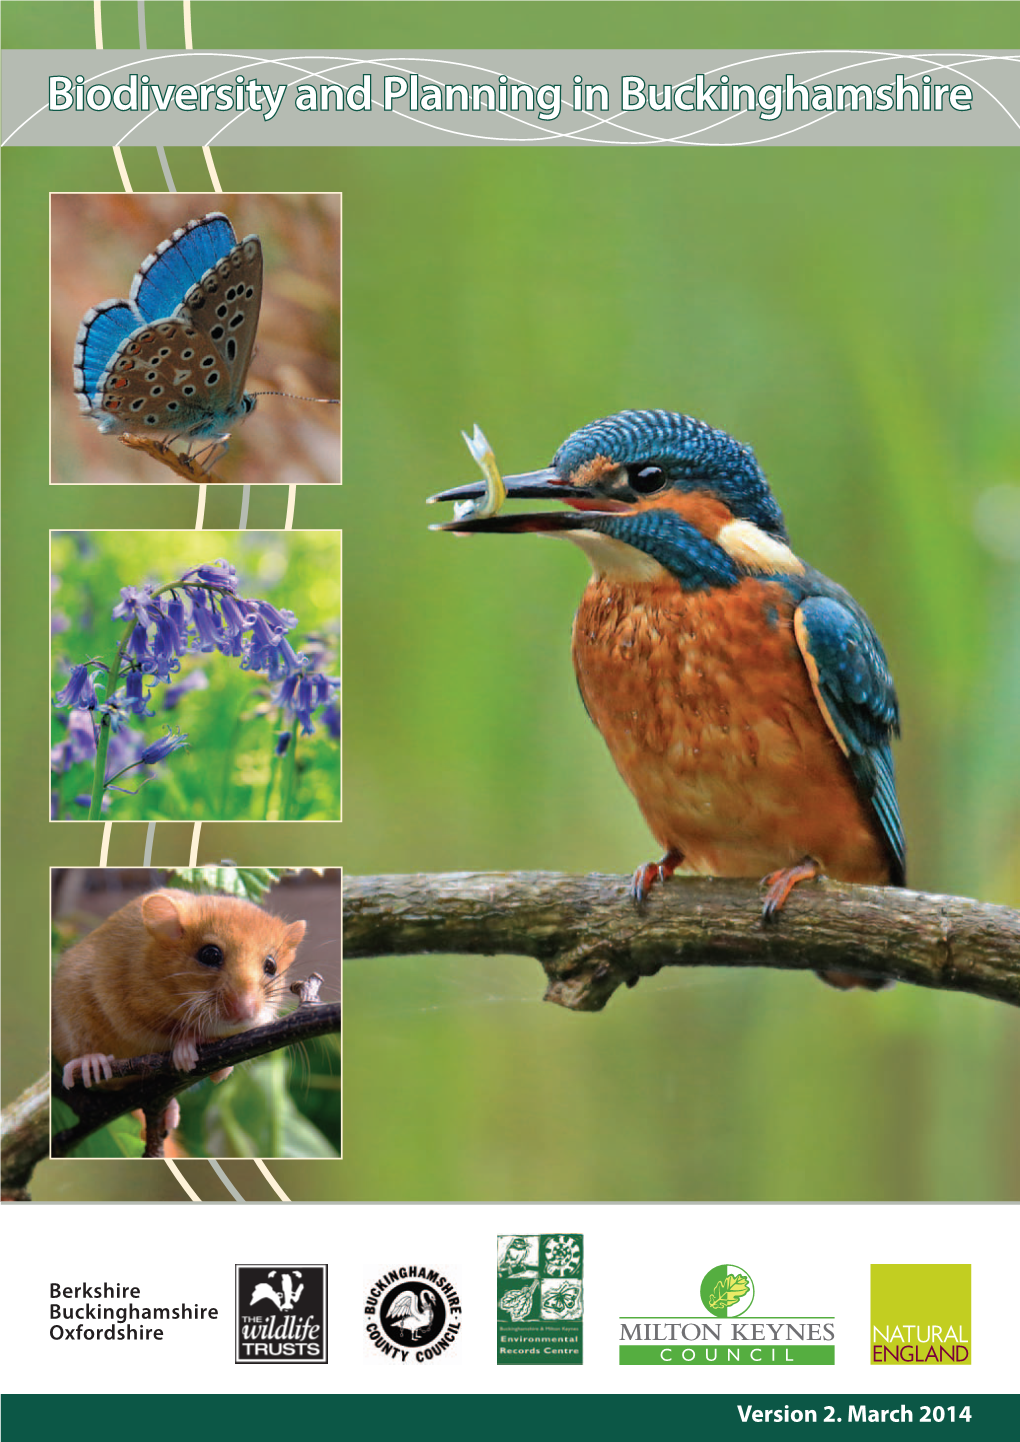 Biodiversity and Planning in Buckinghamshire